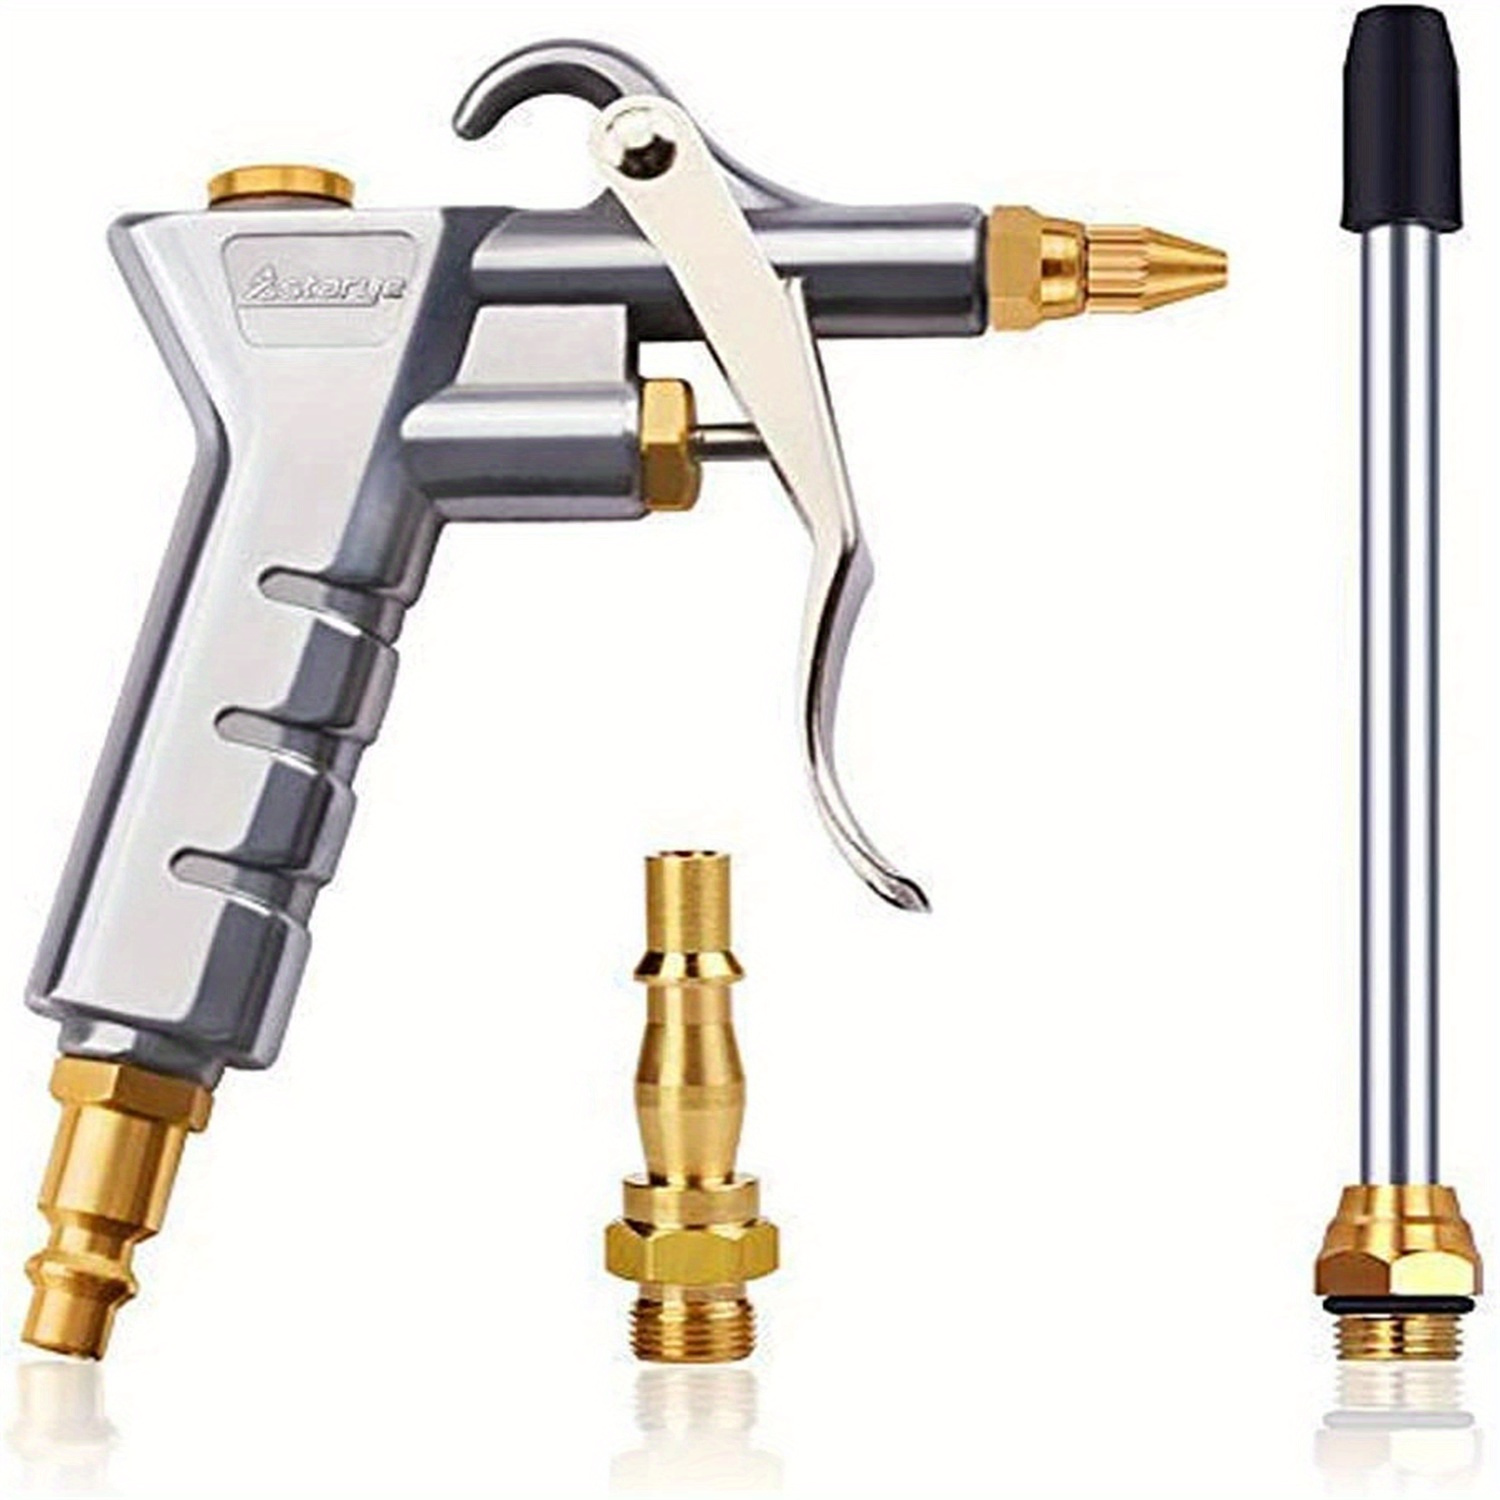 

Professional Brass Head Blowing Gun With Extended Nozzle - Air Compressor, Dust Collector, High-pressure Pistol Grip Joint, Pneumatic Air Cleaning Tool